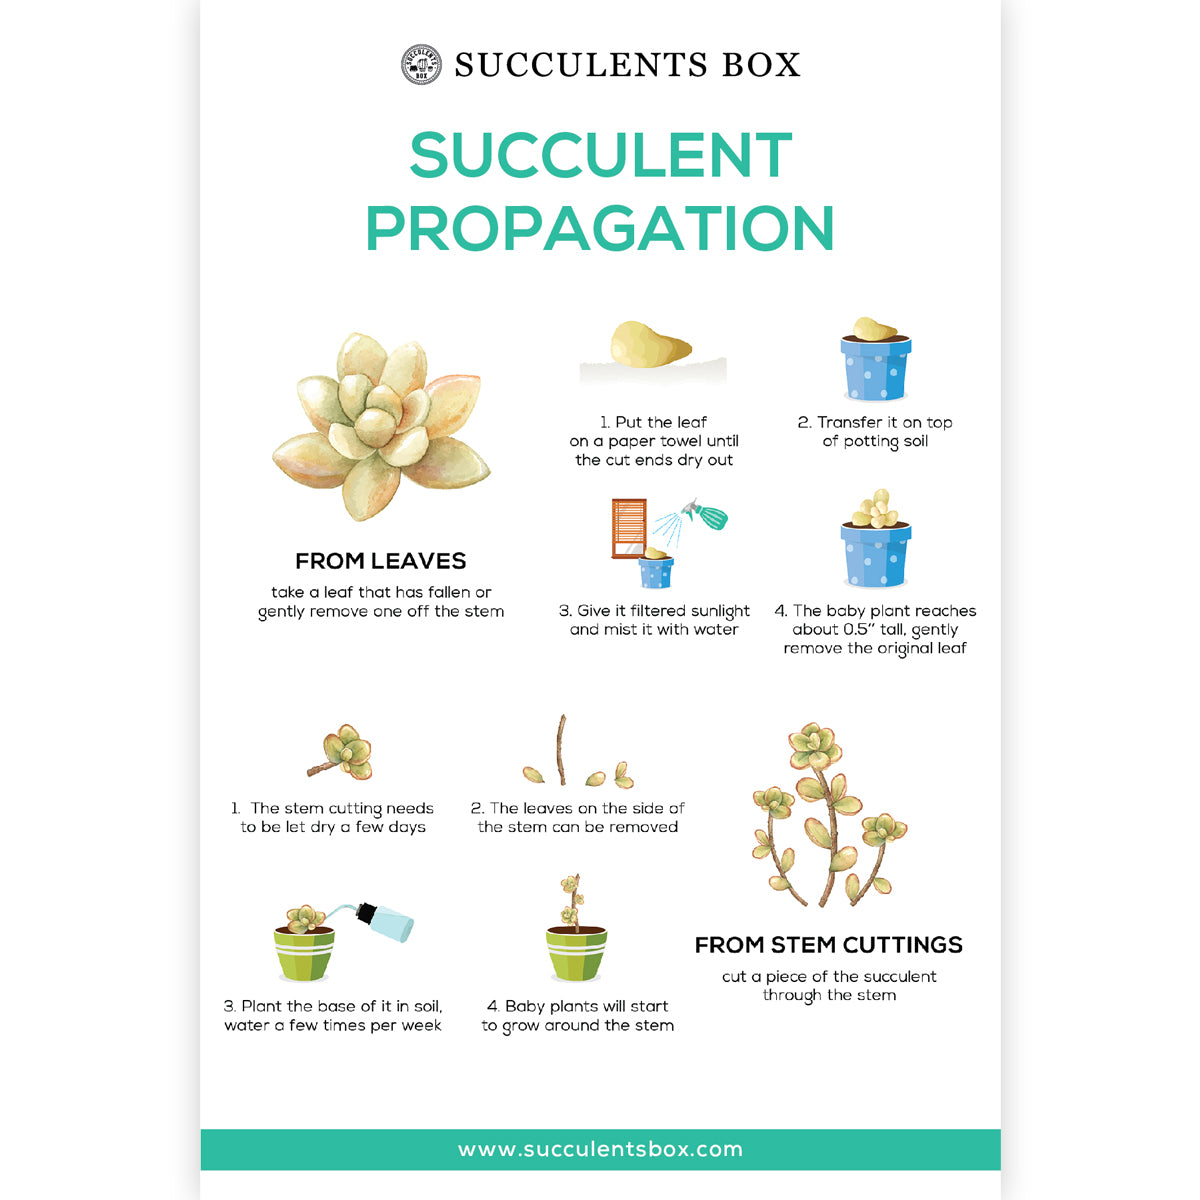 Succulent Propagation Card for sale, How to Propagate Succulent Plant from Leaves & Cuttings, Succulent gift for plant lovers